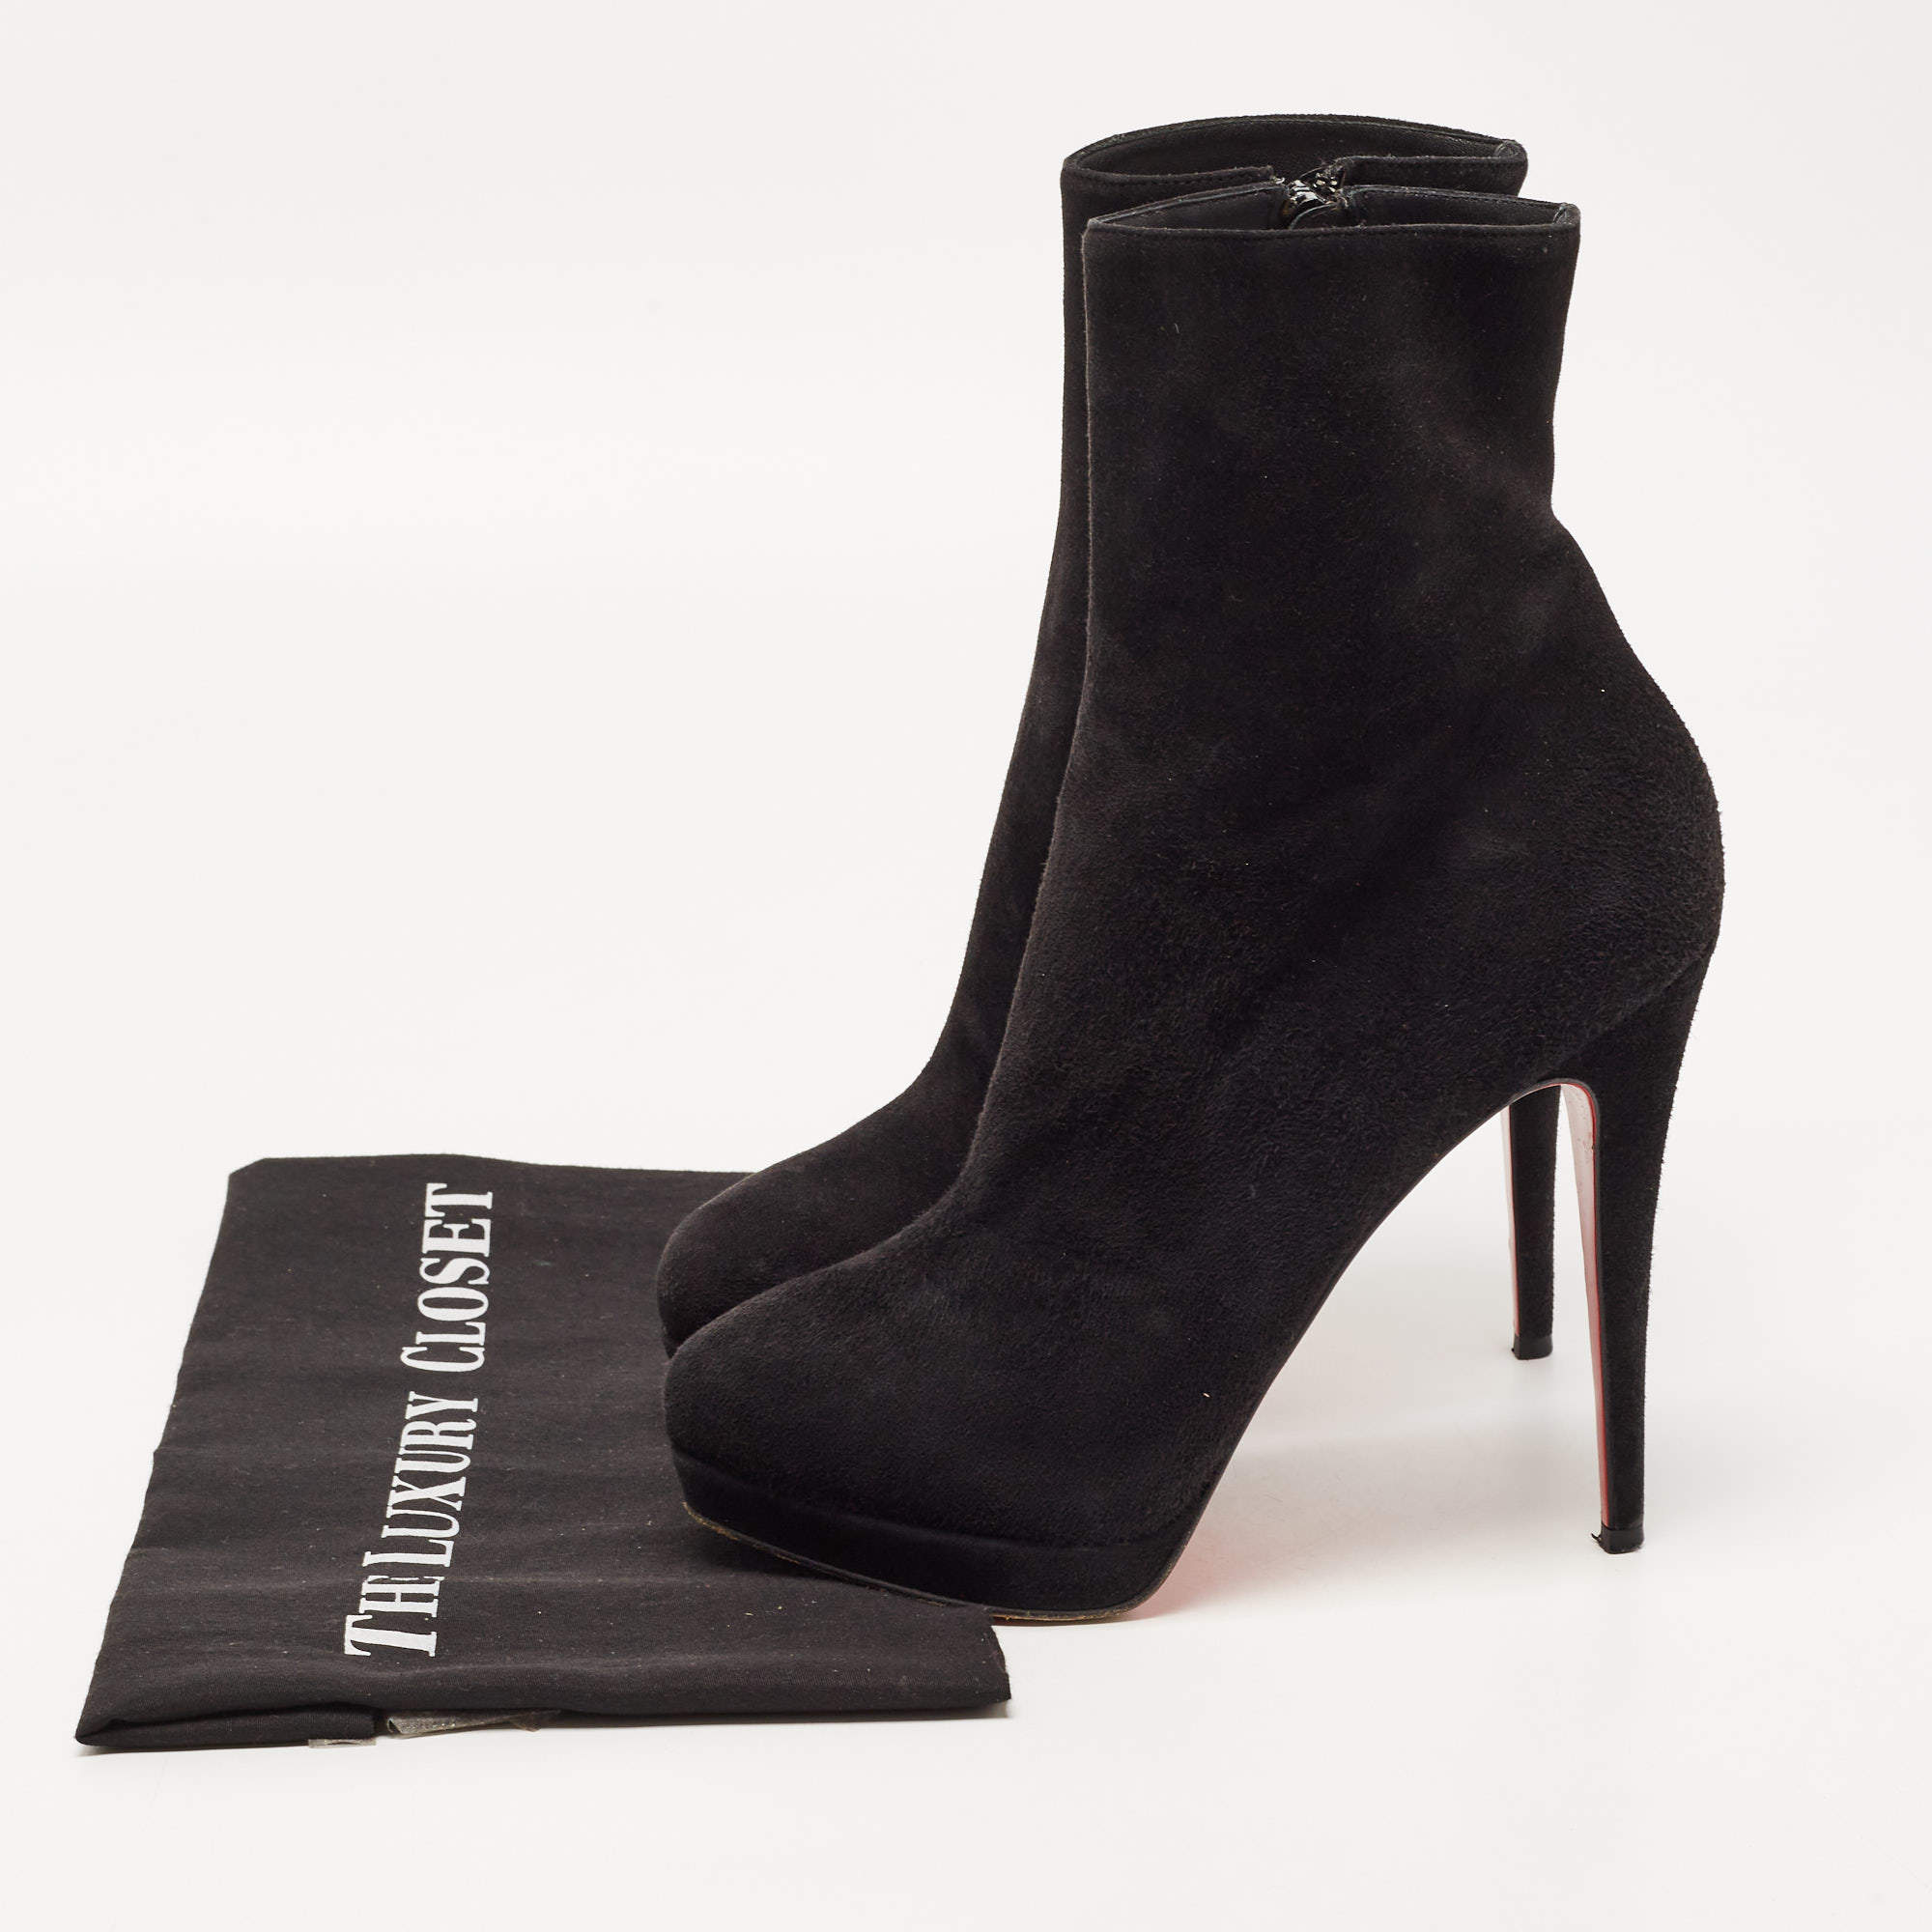 Christian Louboutin Black Suede Studded Zip Ankle Boots Size 39 at